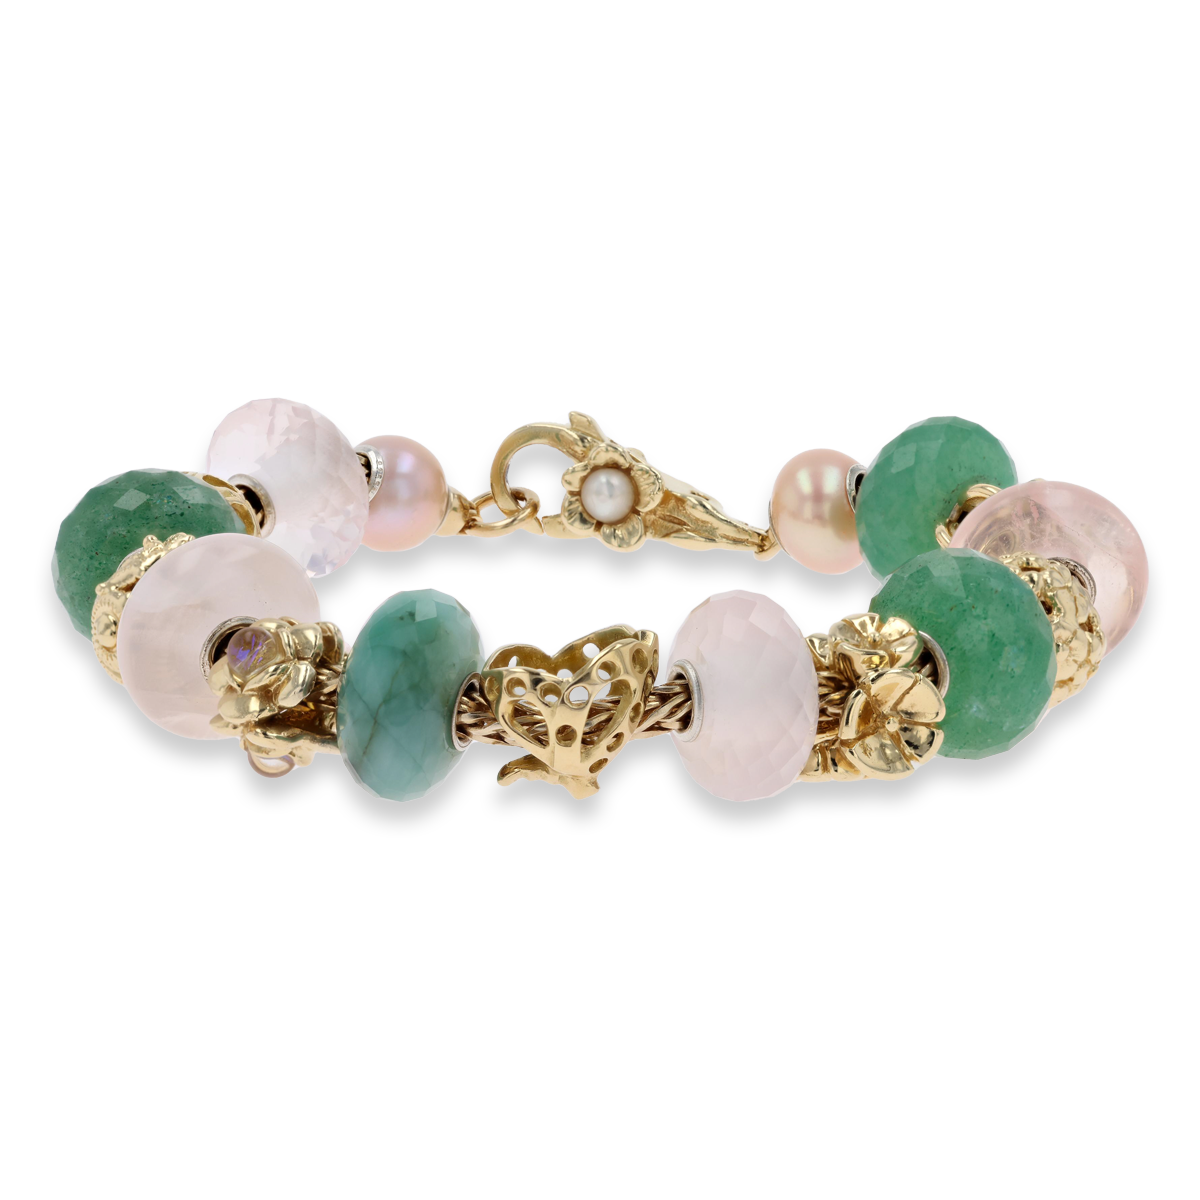 Trollbeads 18ct Yellow Gold Dancing Butterfly on Bracelet with Precious Stones